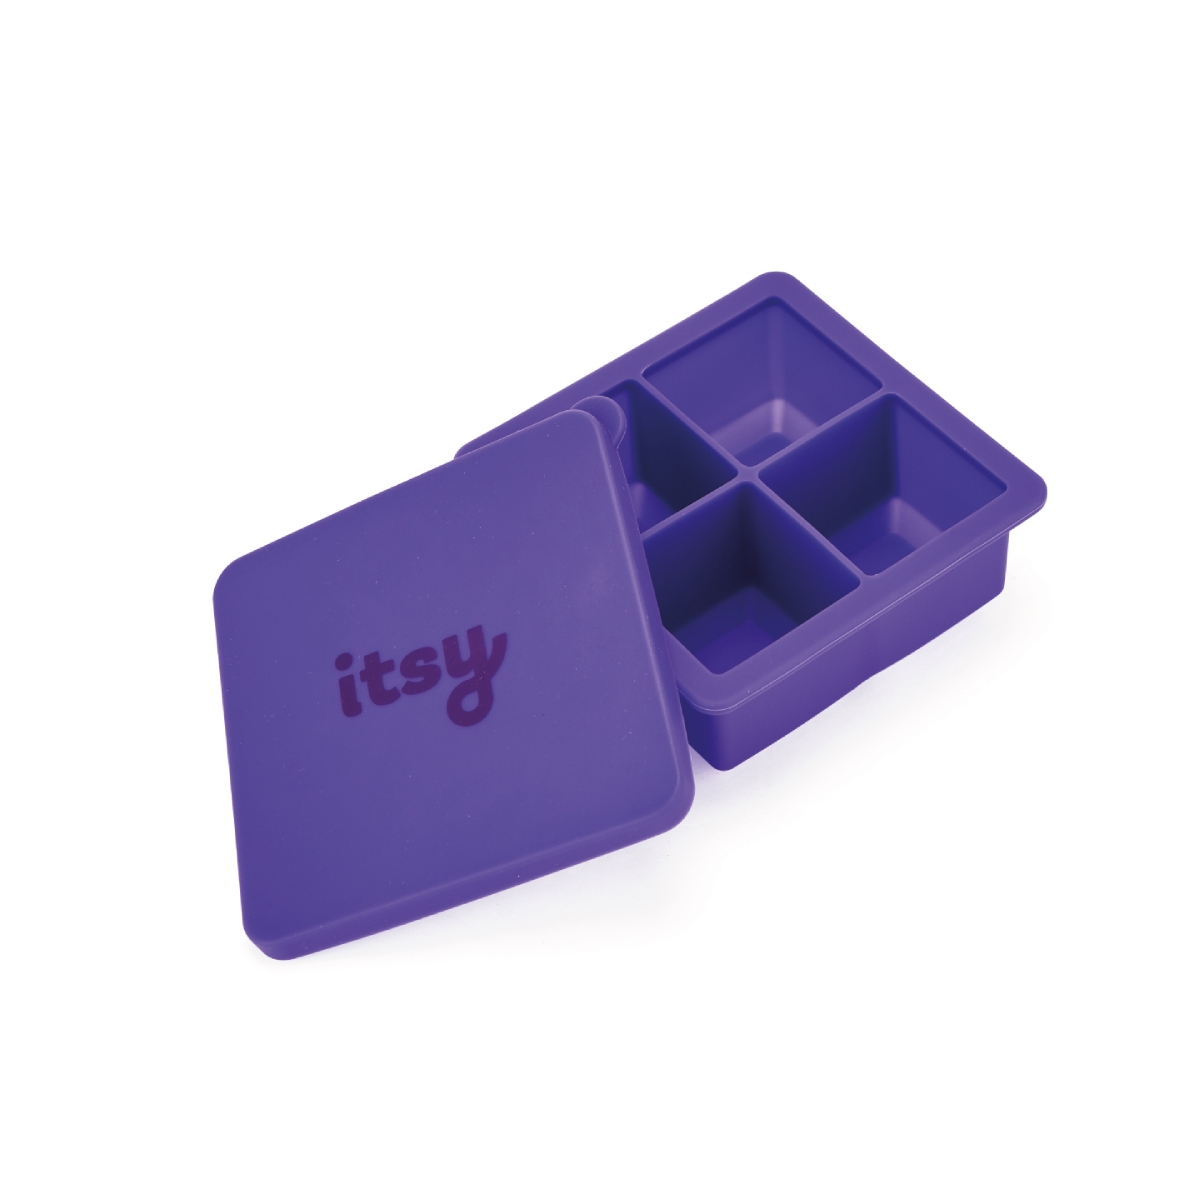 Itsy Snack Store Tray